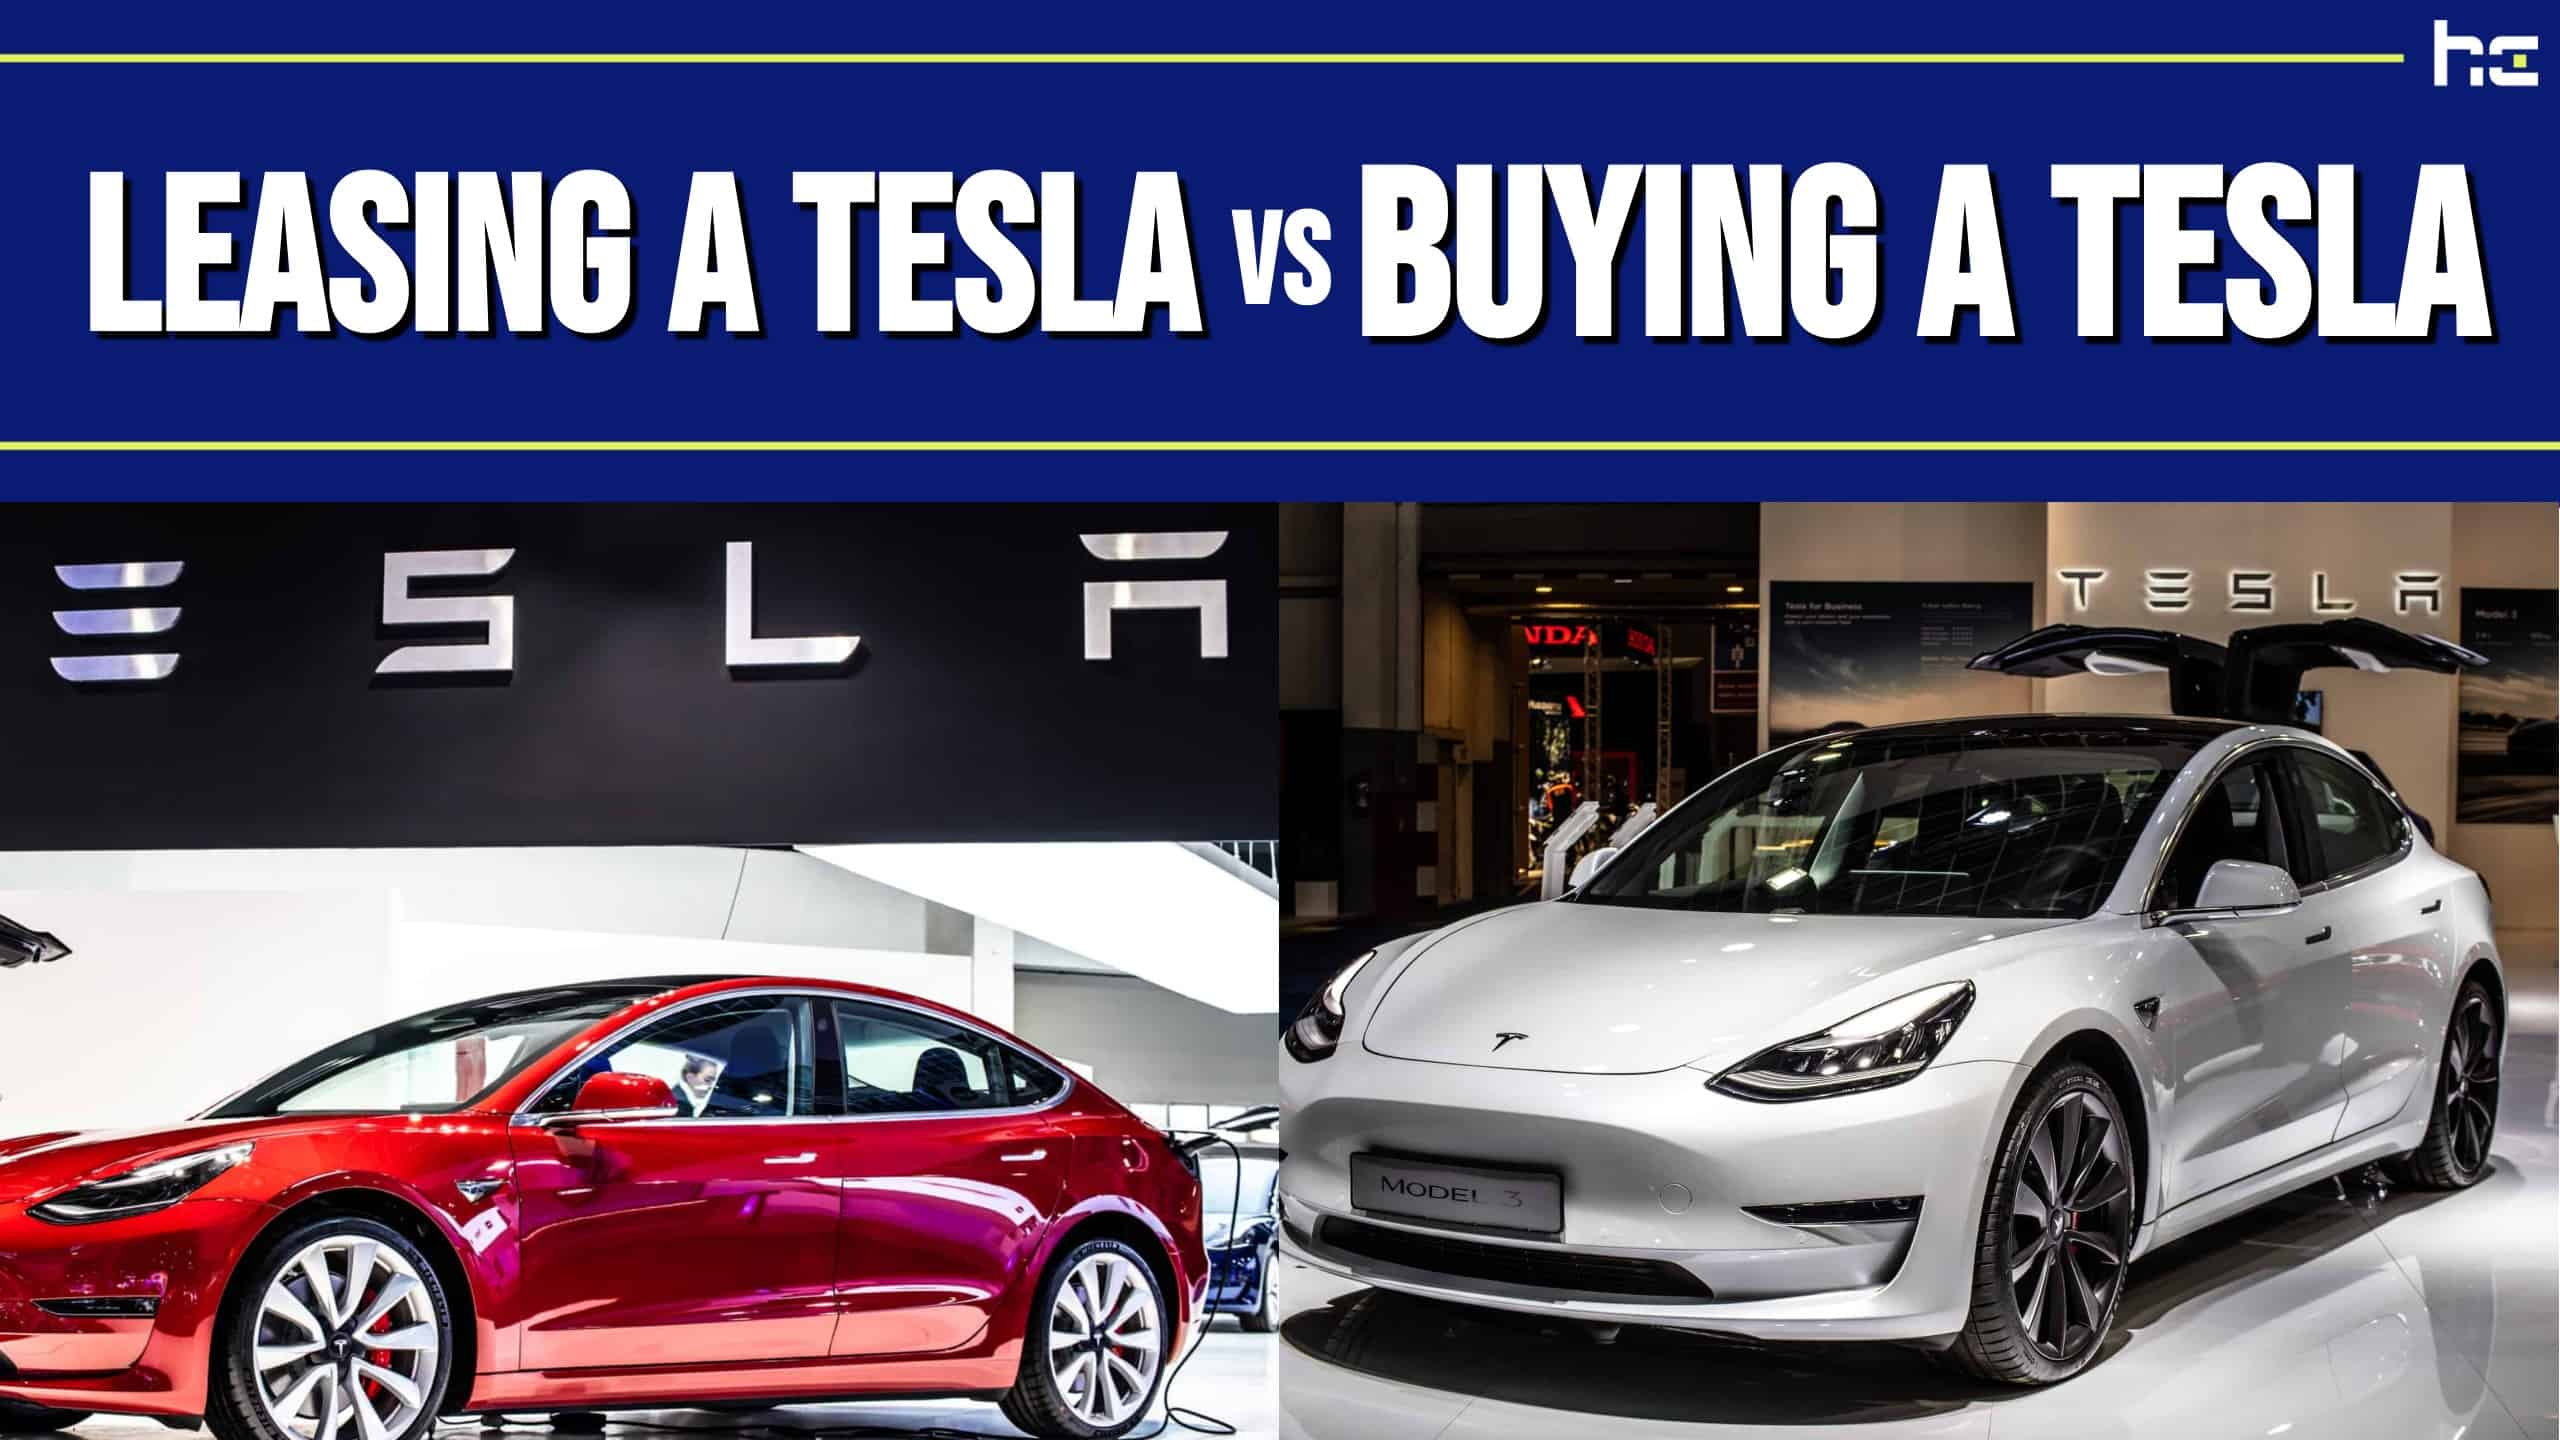 Leasing a Tesla vs Buying a Tesla featured image